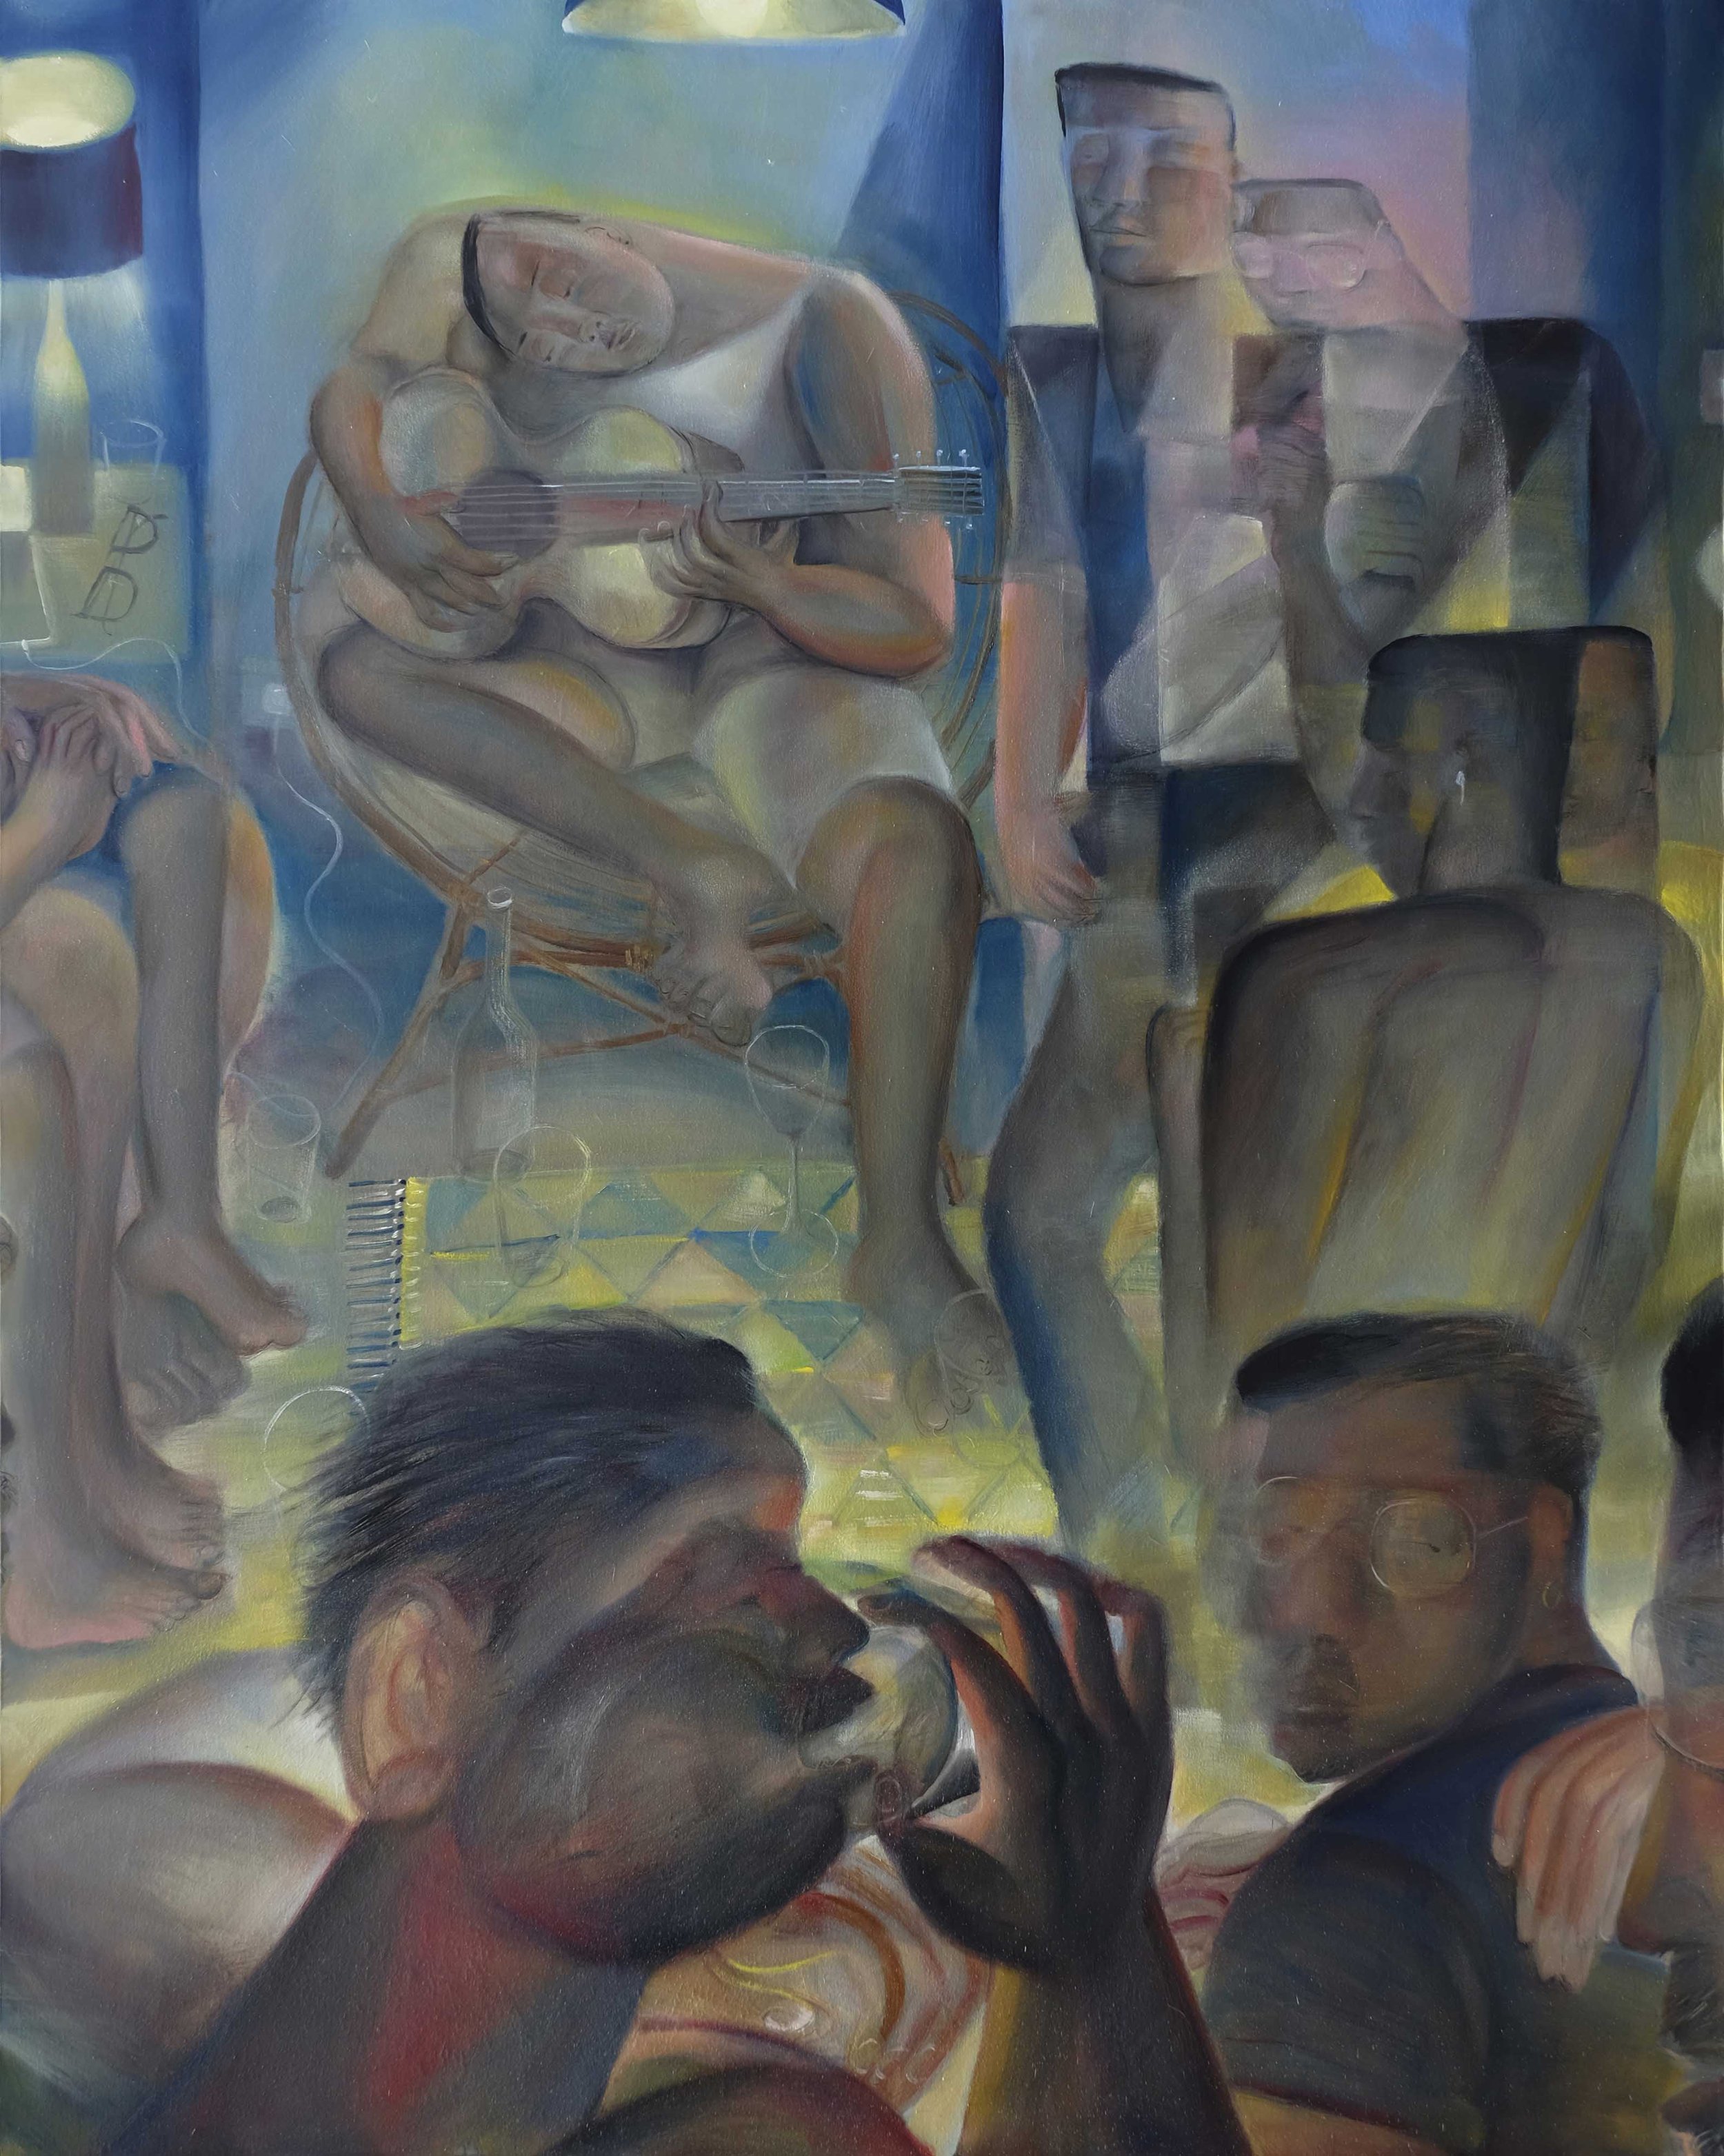   Sayang  (2022) oil on canvas, 200 x 250cm 